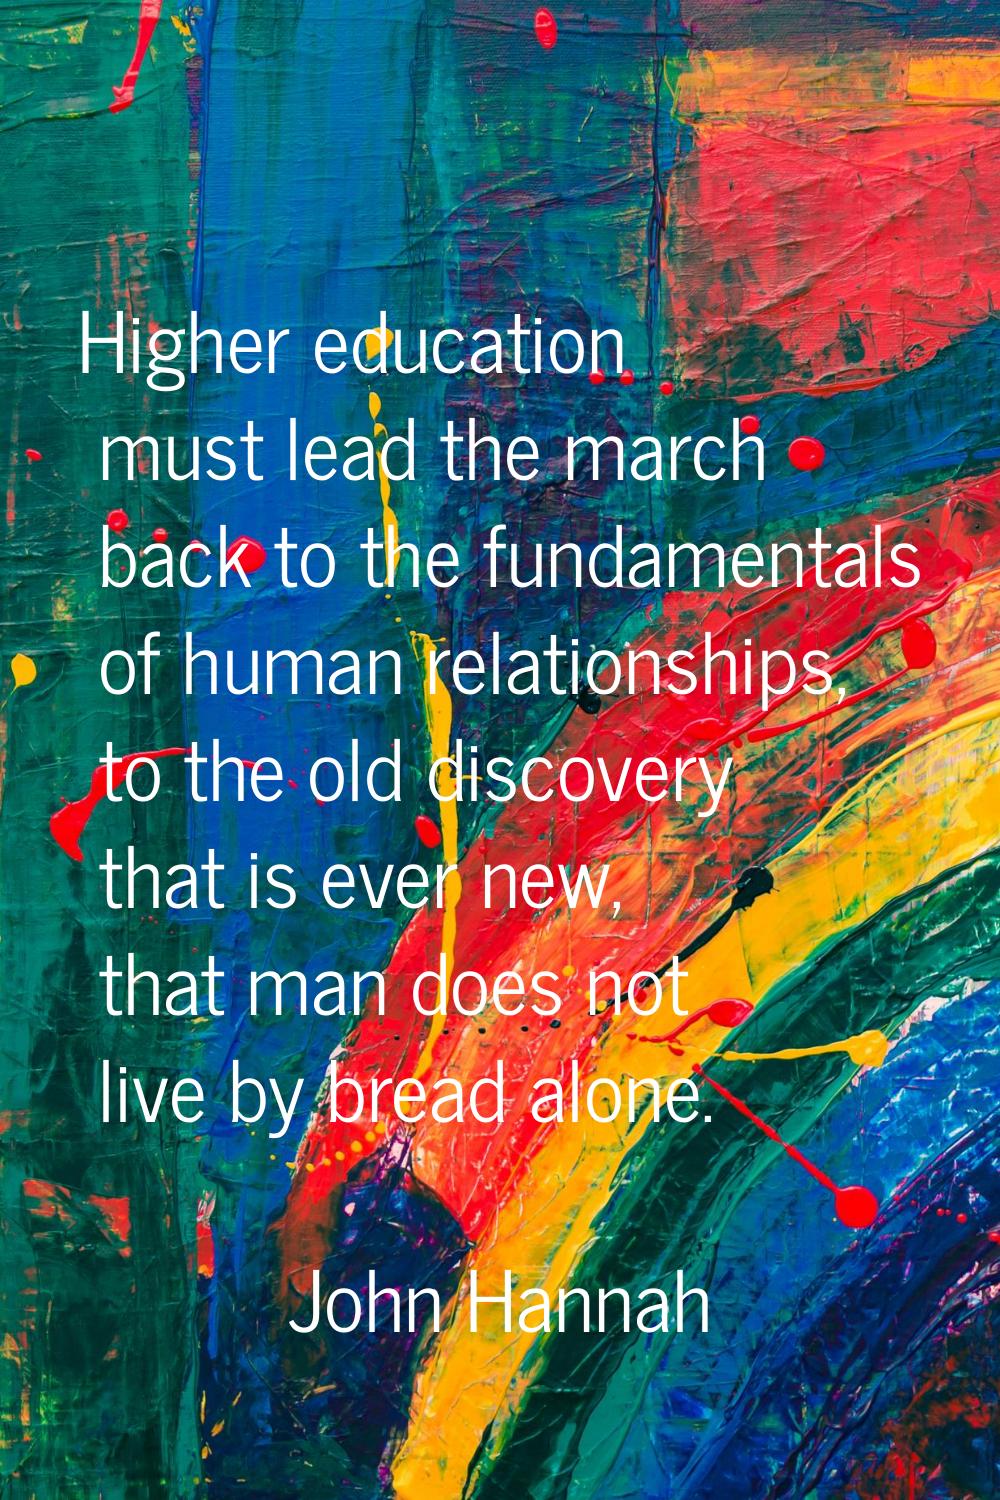 Higher education must lead the march back to the fundamentals of human relationships, to the old di